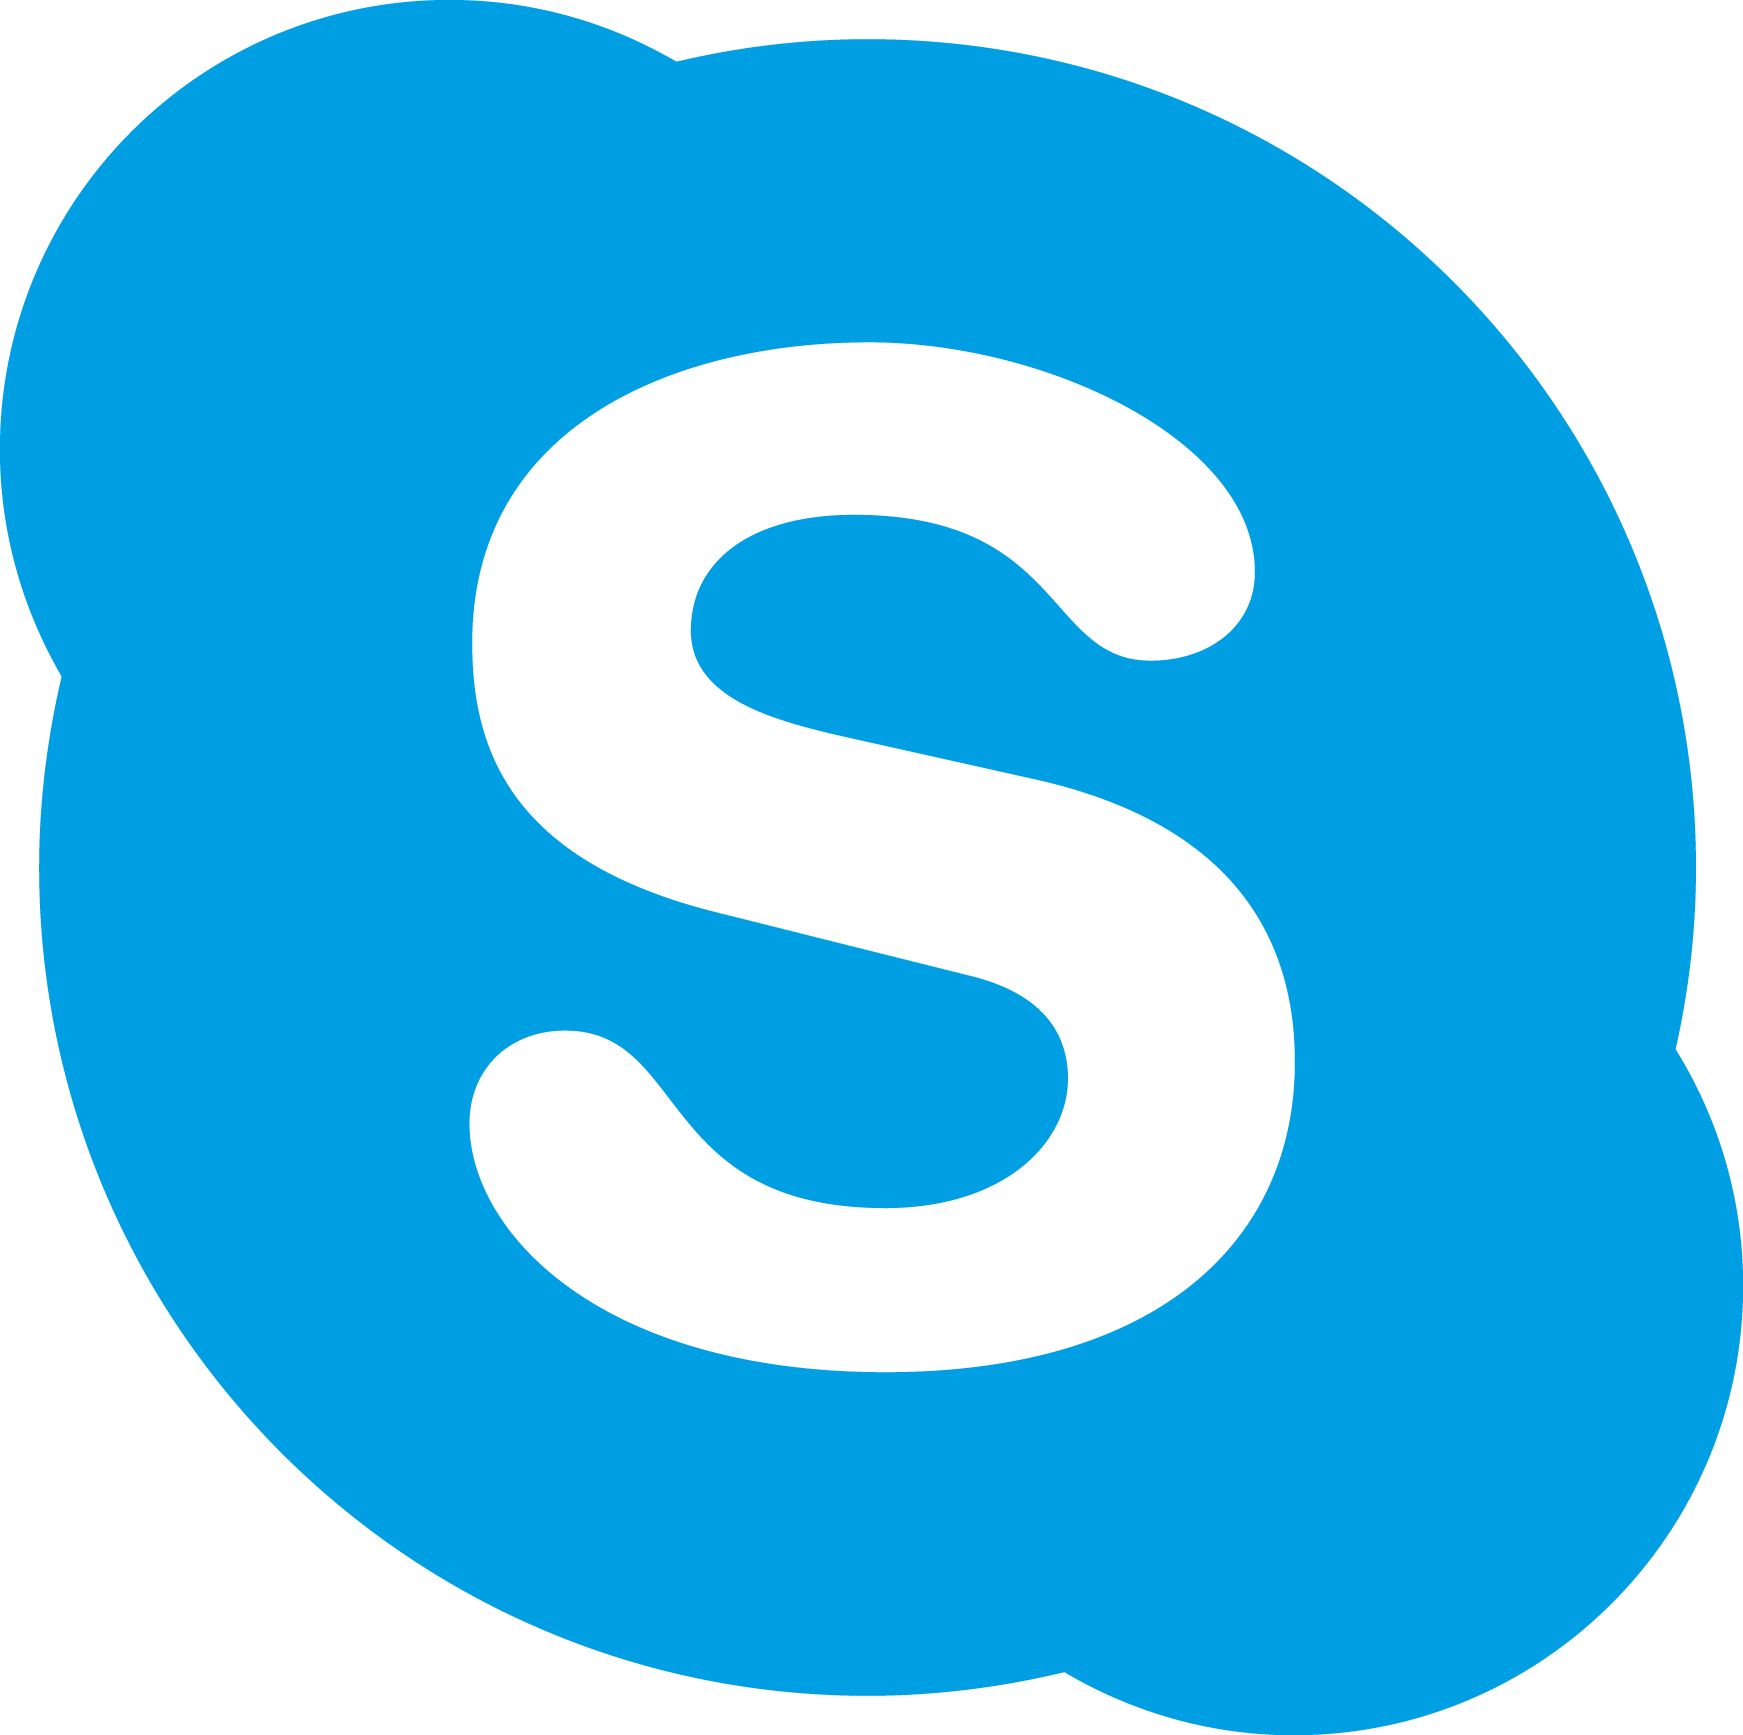 a message from the skype ceo